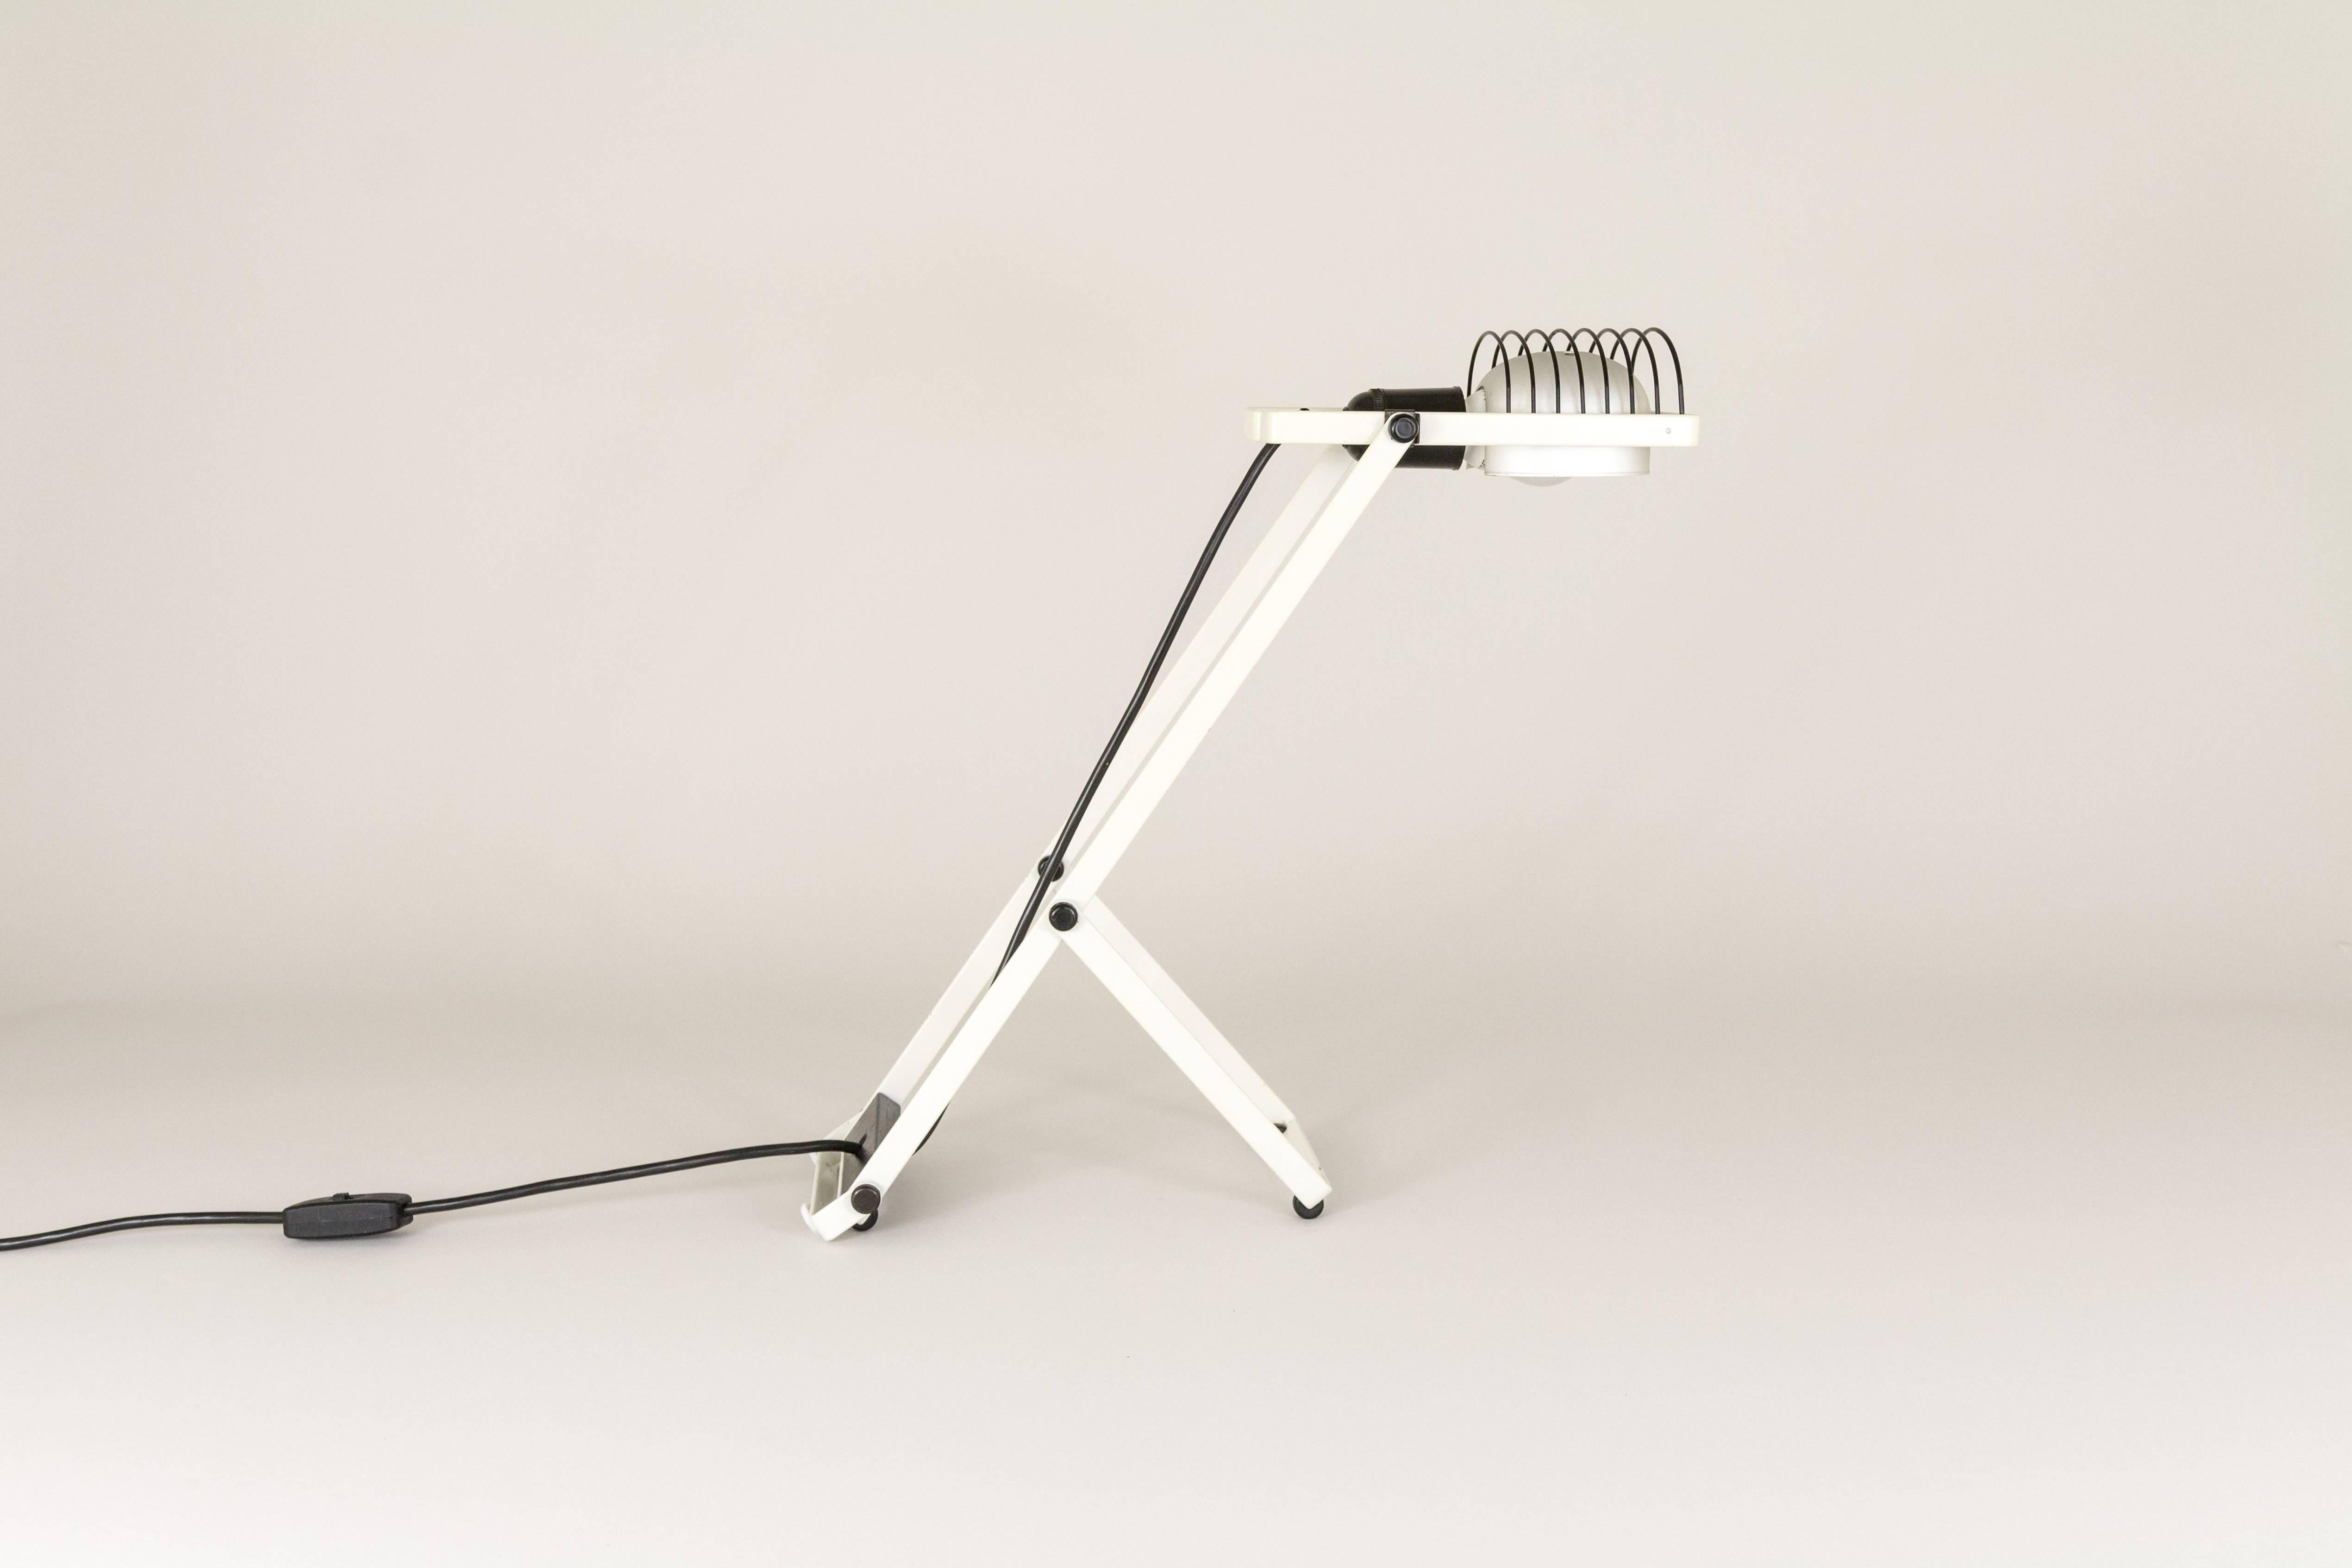 Sintesi table lamp designed by Ernesto Gismondi for Italian lighting company Artemide in the 1970s.

The lamp can be positioned in various ways. The lamp is in excellent condition and it comes with an original and rare shackle which enables to use